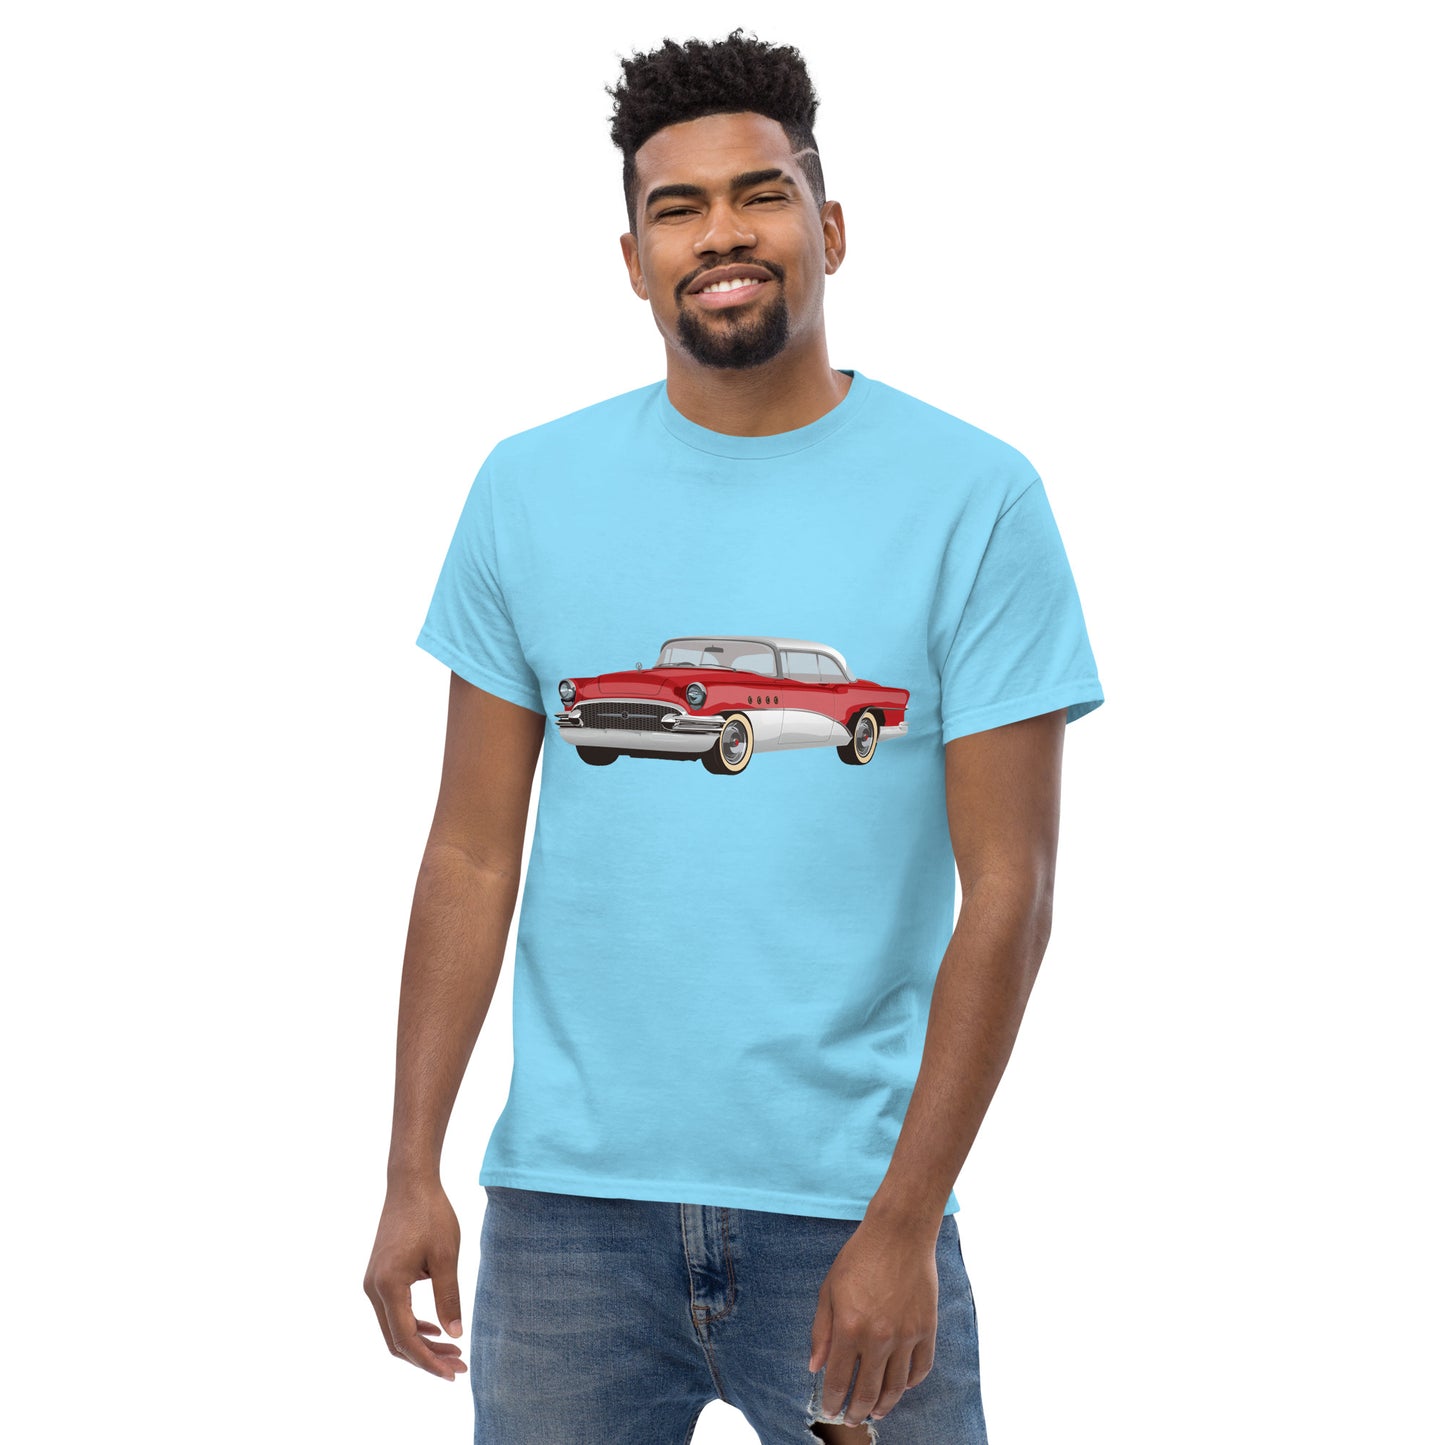 Men with sky blue t-shirt with red Chevrolet 